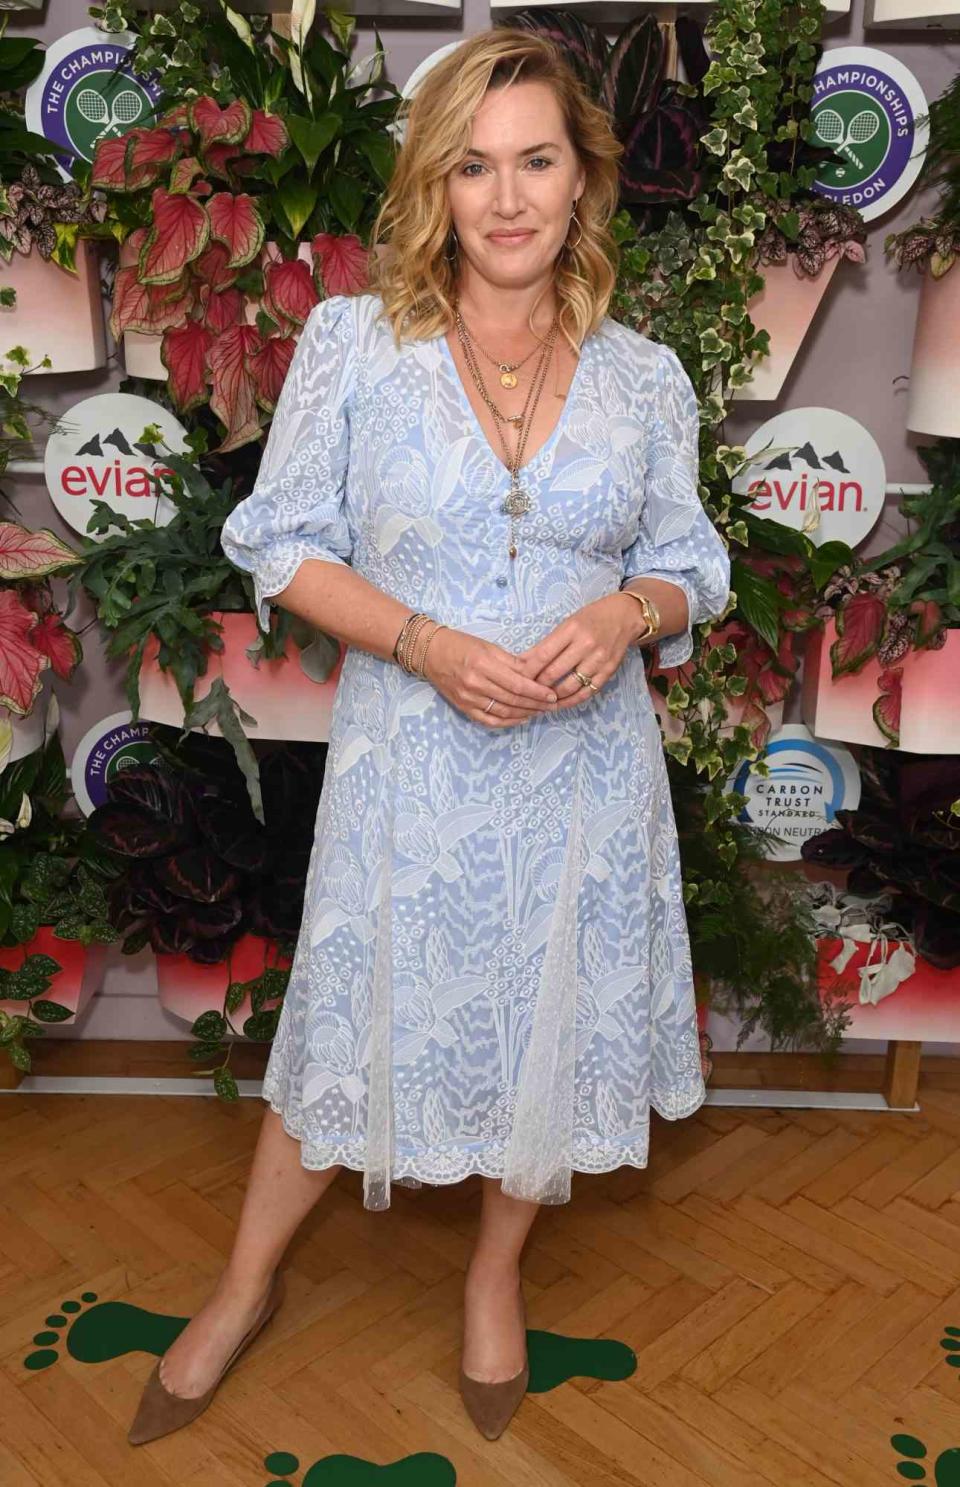 LONDON, ENGLAND - JULY 10: Kate Winslet attends the evian VIP Suite At Wimbledon 2022, Certified As Carbon Neutral By The Carbon Trust at The Championships at Wimbledon on July 10, 2022 in London, England. (Photo by David M. Benett/Dave Benett/Getty Images for evian)